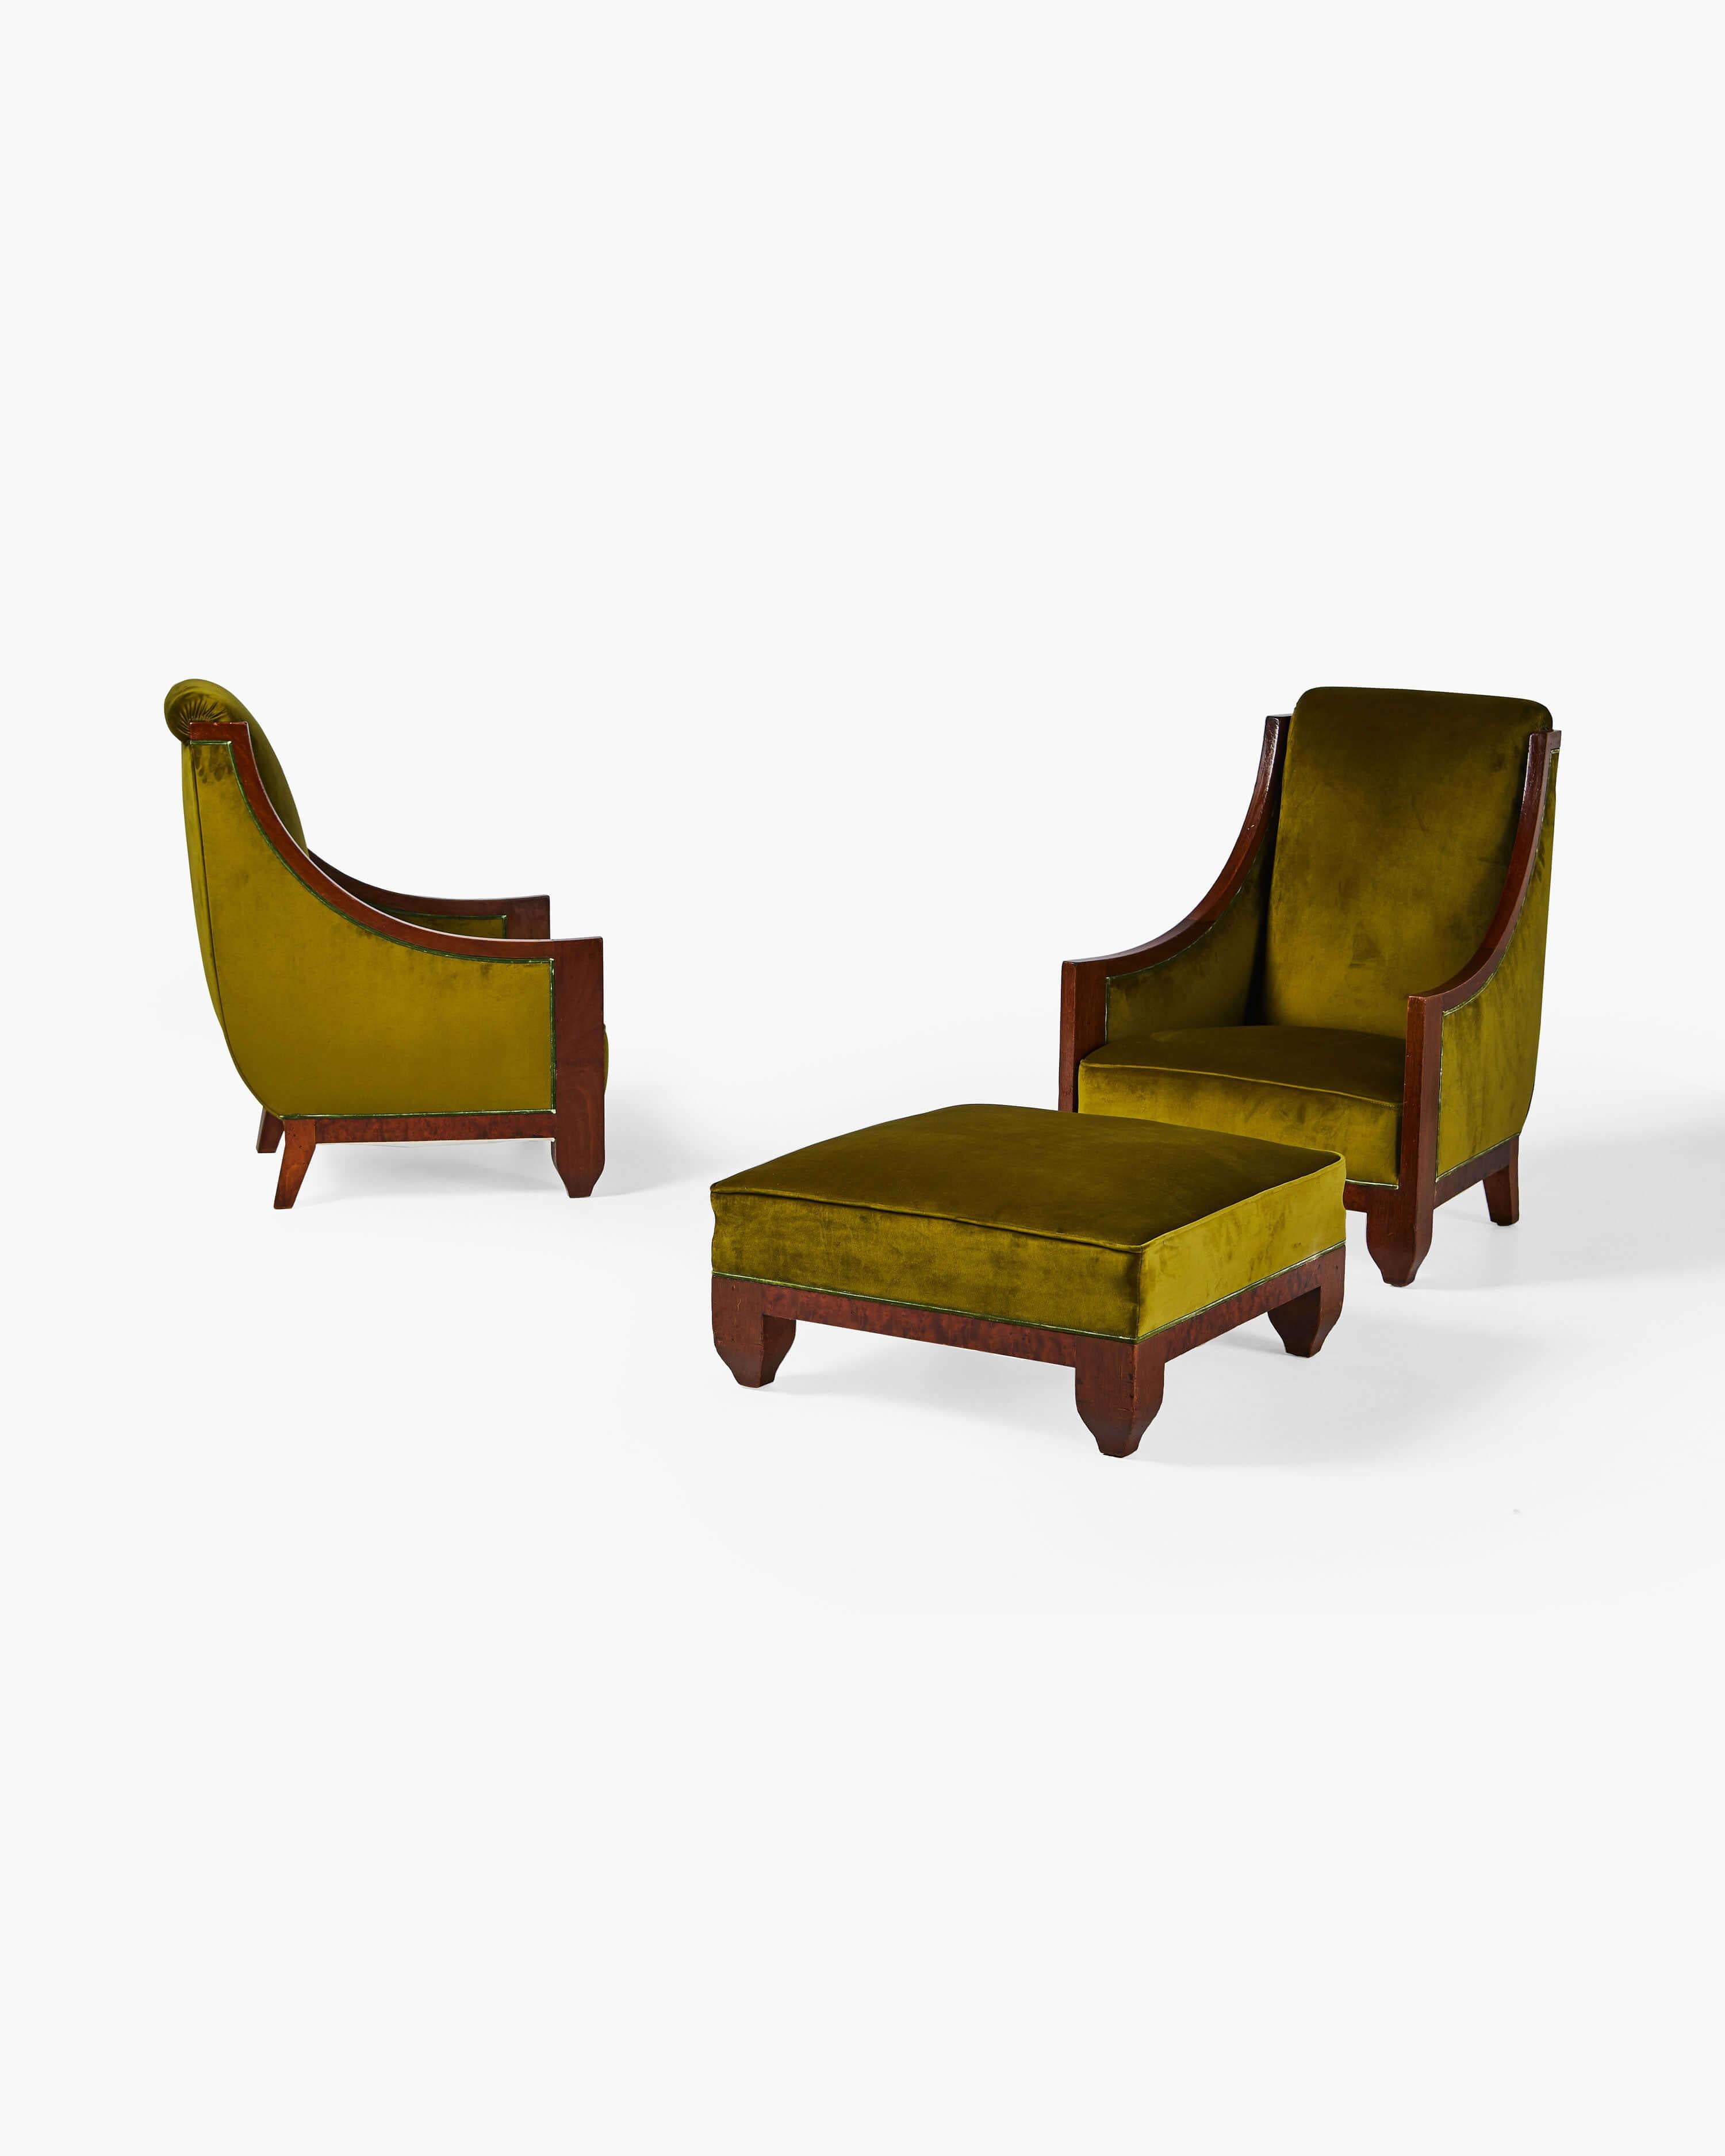 French designer André Sornay’s subtle decorative finesse is echoed in this Pair of Armchairs and Ottoman, featuring walnut wood and distinctive chartreuse velvet upholstery. Sornay's furniture combined traditional use of precious woods with